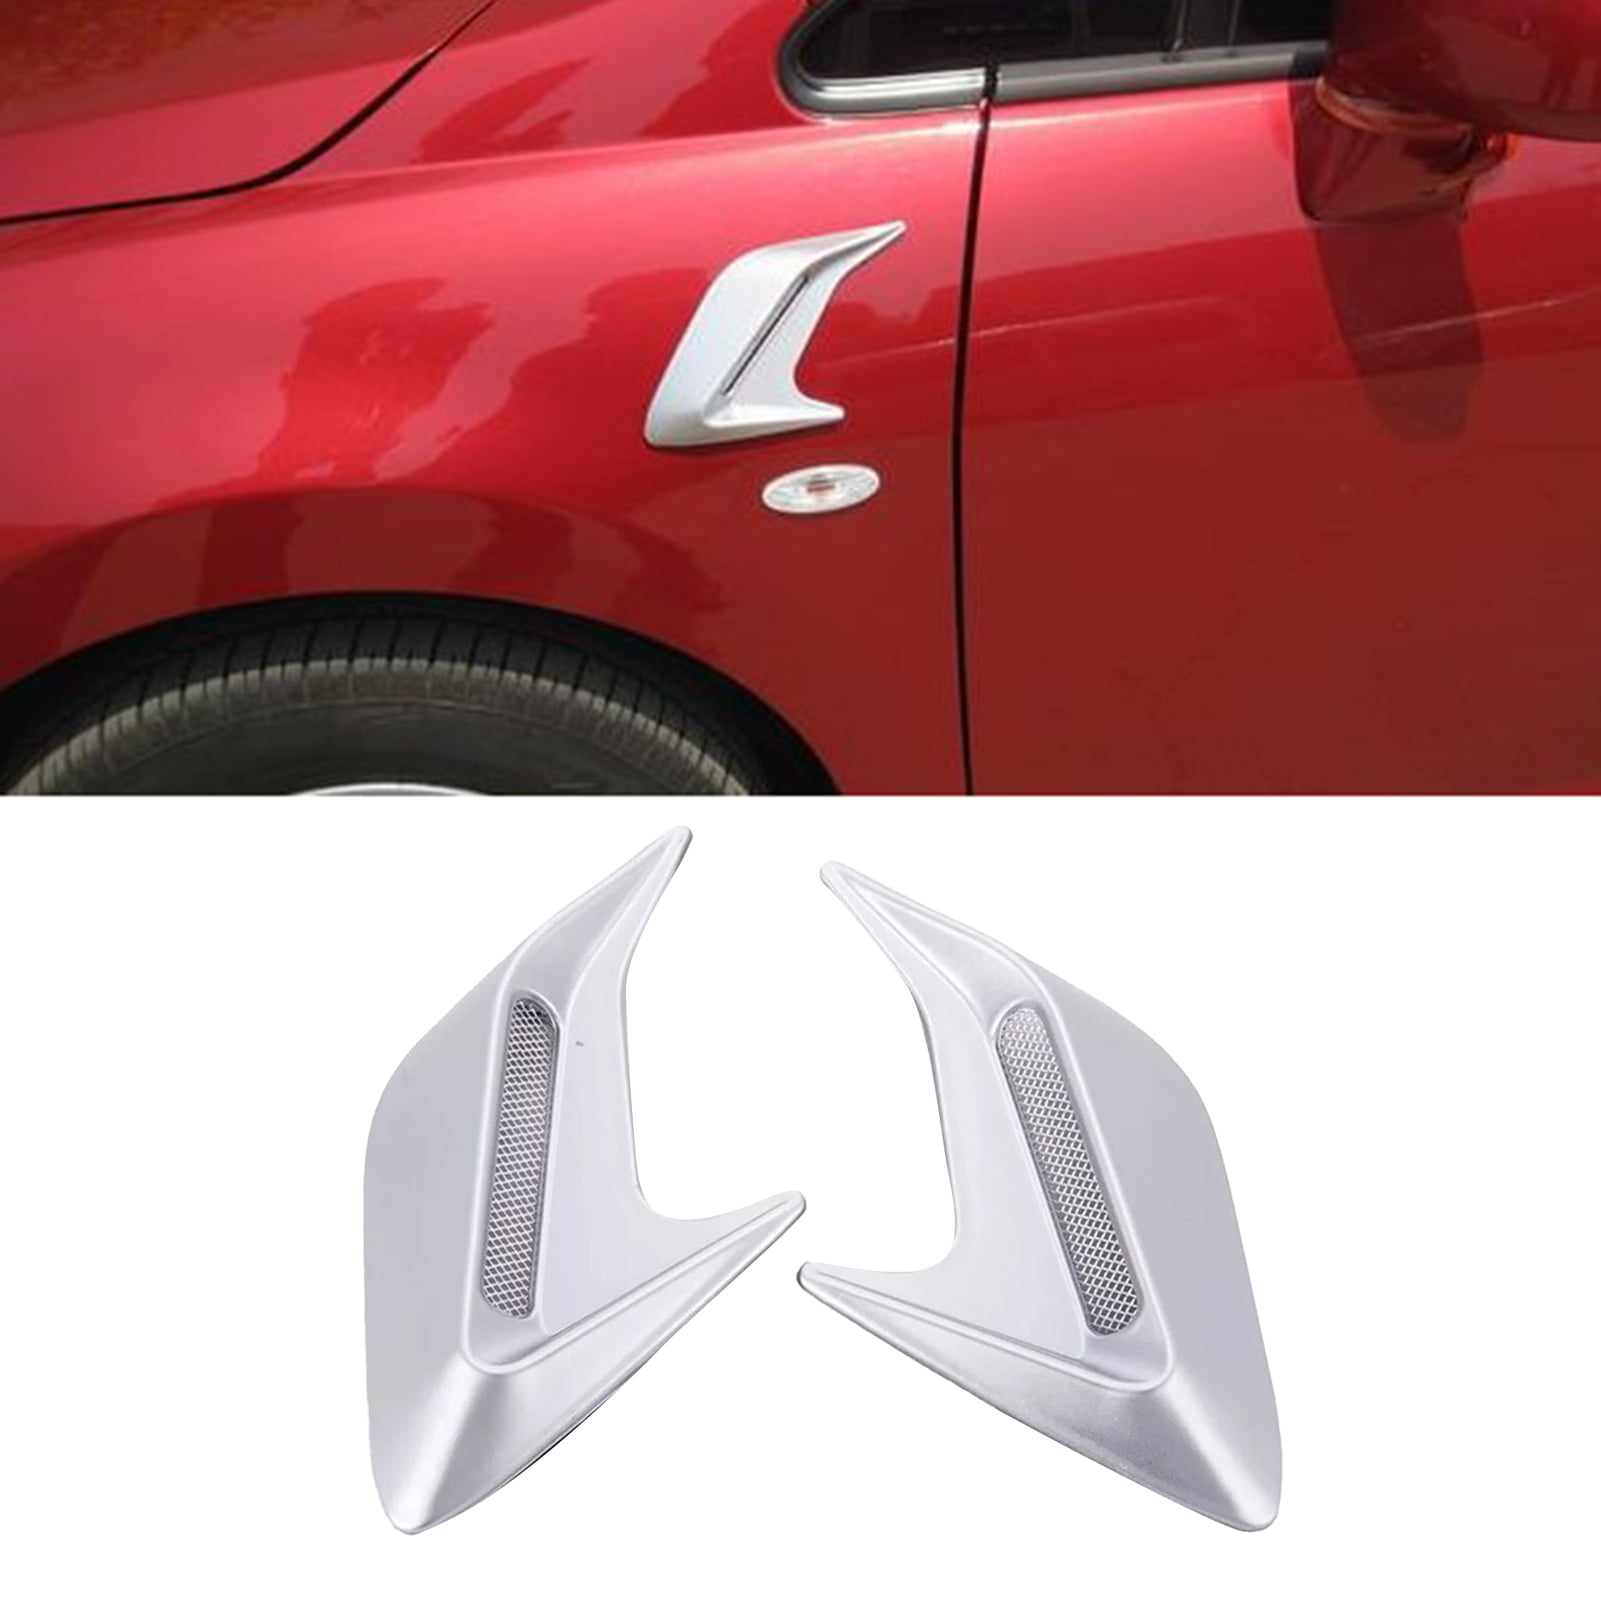 1 Pair  Silver Shark Fins Car Body Side Air Flow Vent Grille Stickers Kits Decal